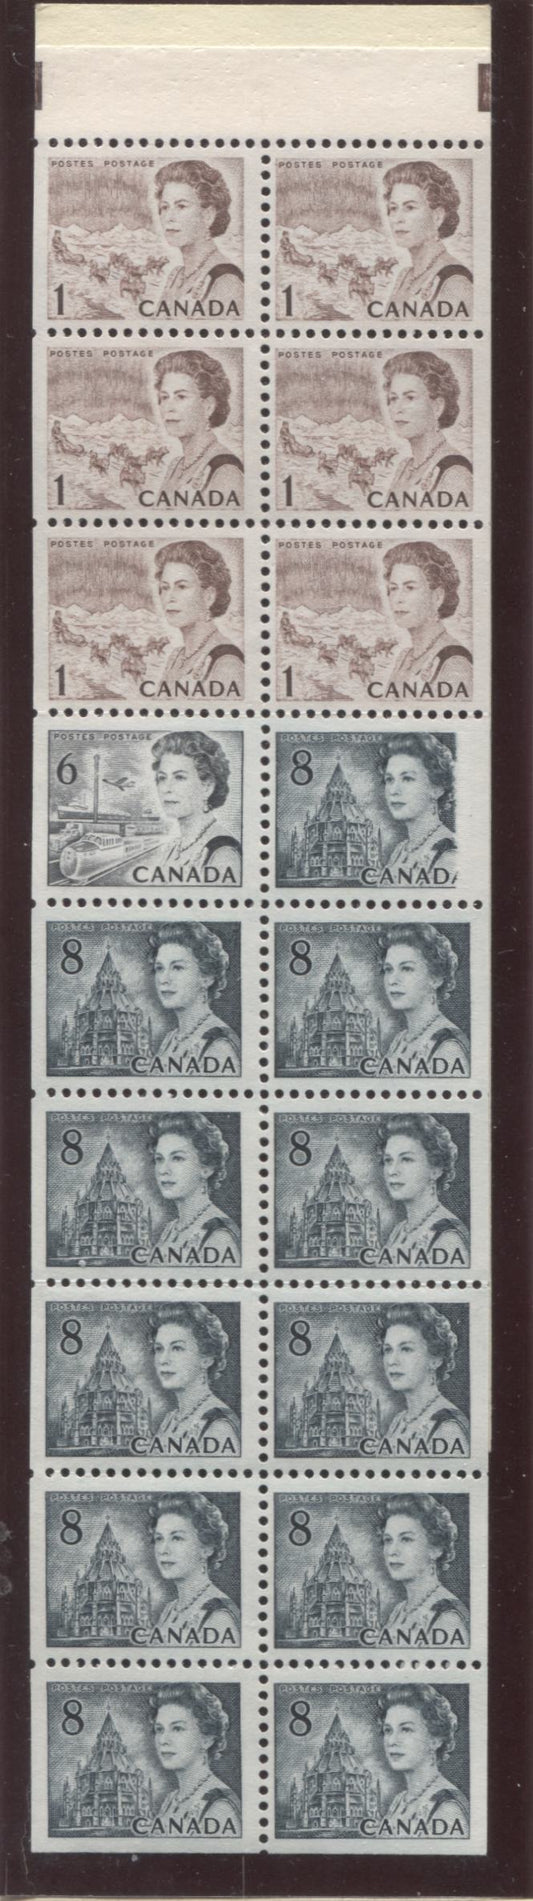 Lot #14 Canada #BK70c 1c Purple Brown, 6c Black & 8c Slate, 1967-1973 Centennial Issue, A VFNH Complete Booklet, Showing the Elusive Short Print on 2/4, Untagged